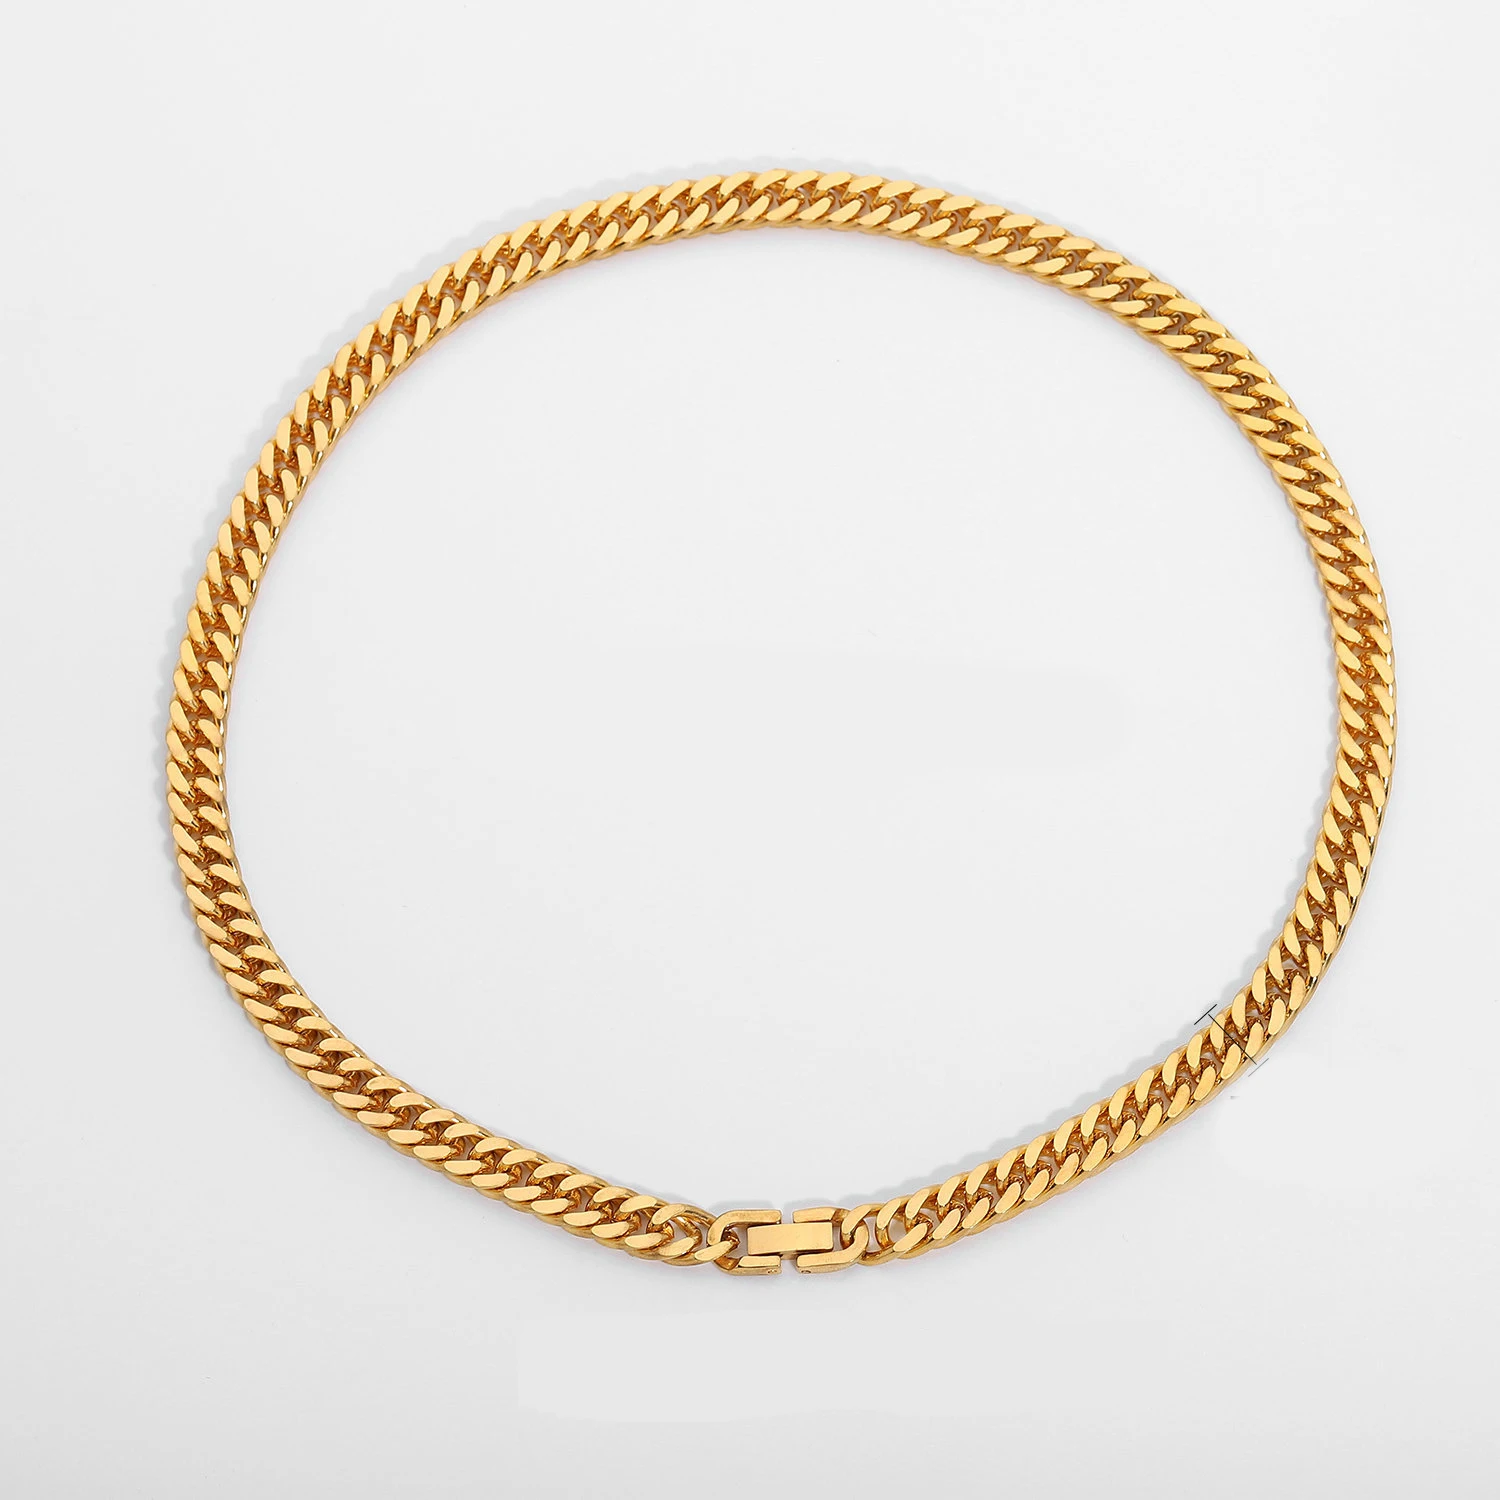 

Women's jewelry Gold Thick Chunky Chain Necklace 18K Gold Filled Stainless Steel Cuban Link Chain Necklace